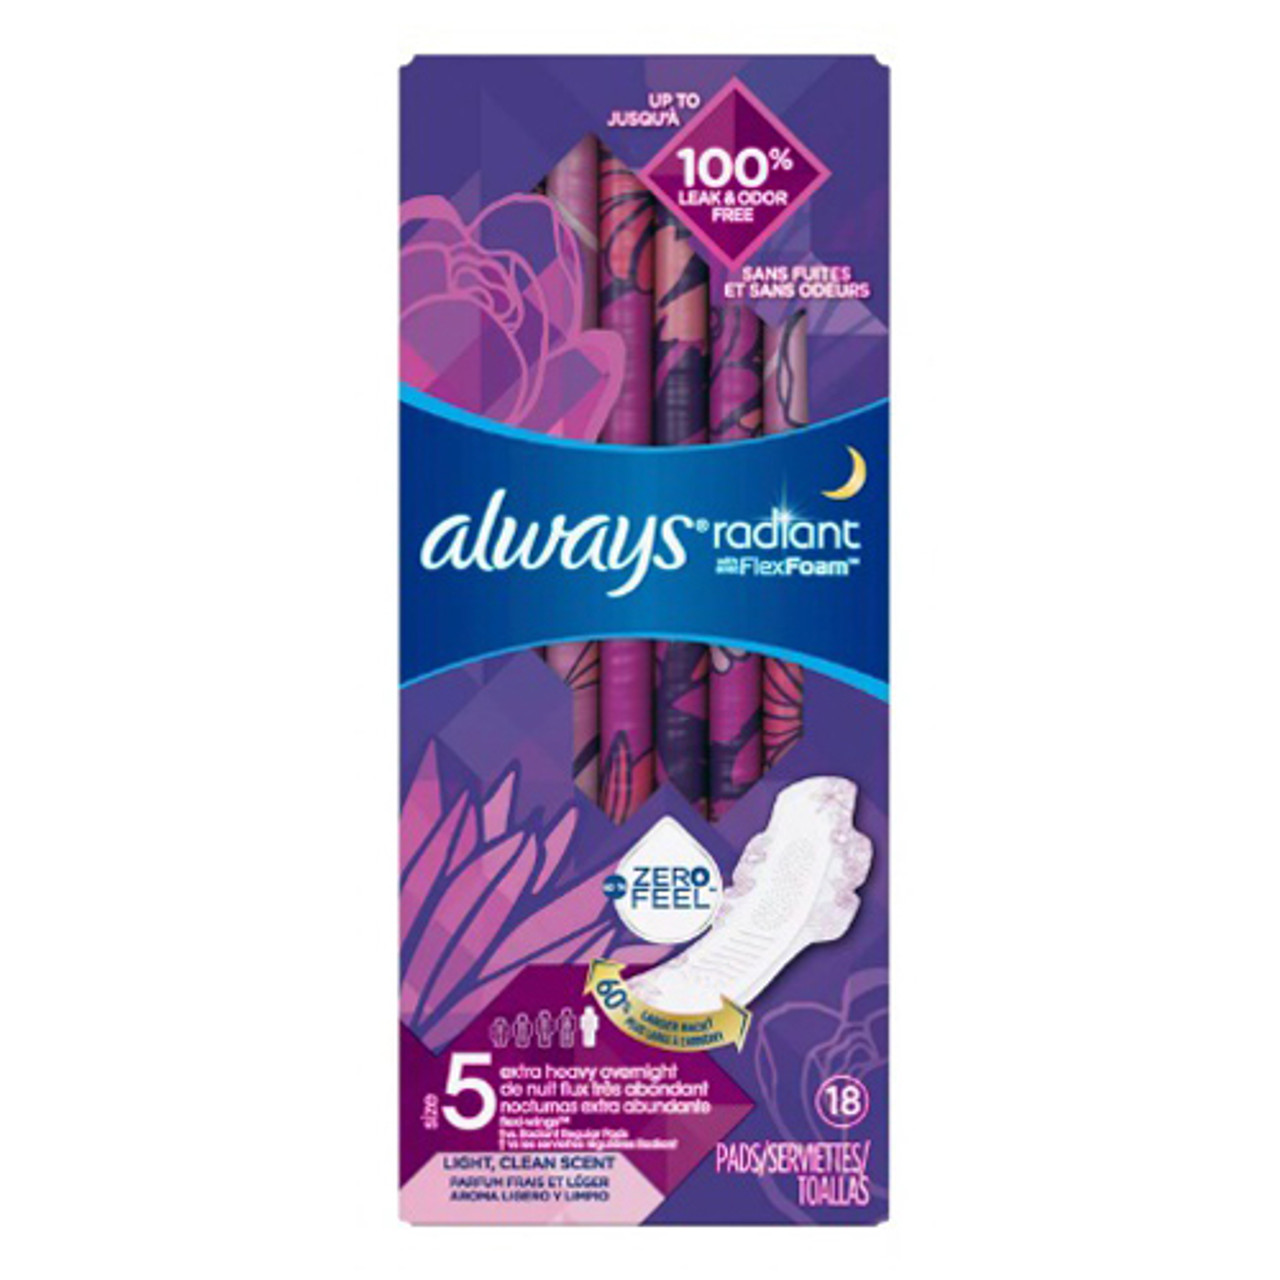 Always Infinity Extra Heavy Sanitary Pads with Wings - Unscented - Size 3 -  28 Count, 6 Pack 